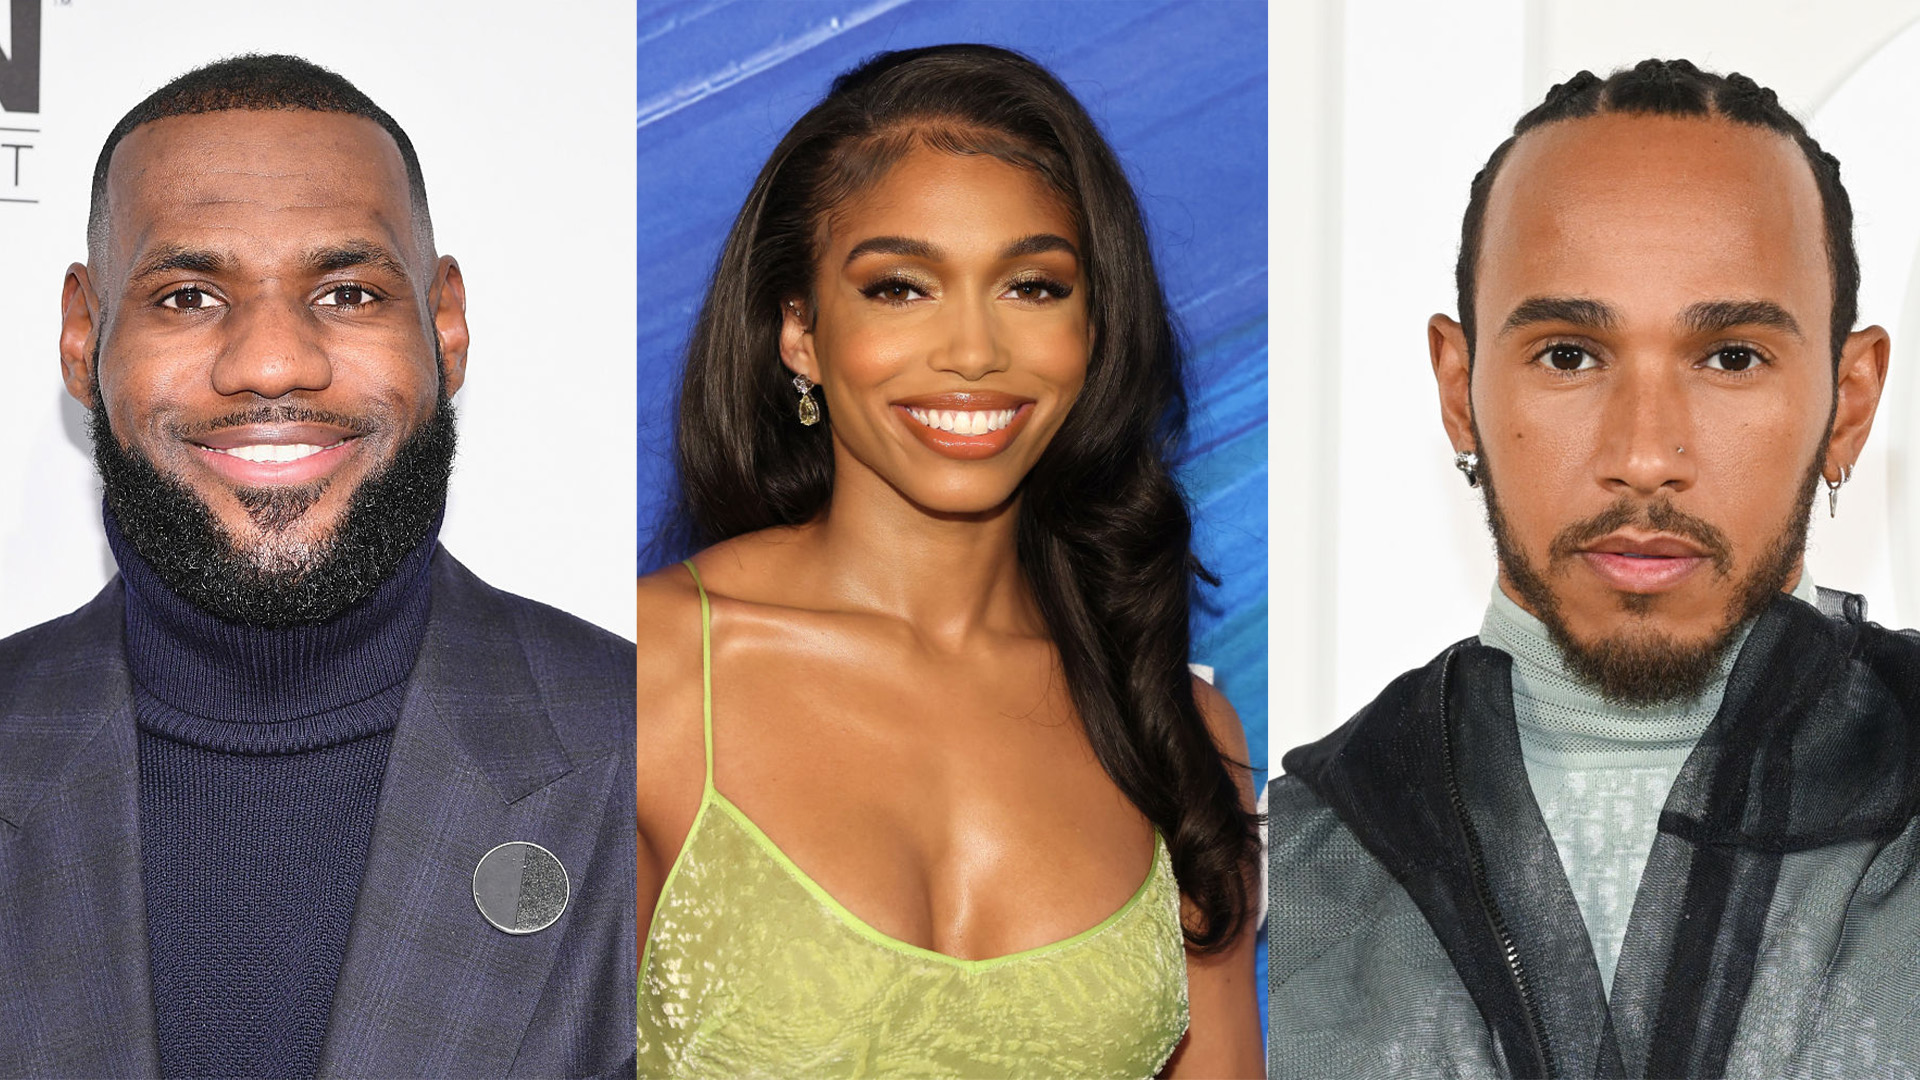 Capricorns Tend To Be Hard-Working, But These Black Celebs Embody The Business Acumen Of The GOAT